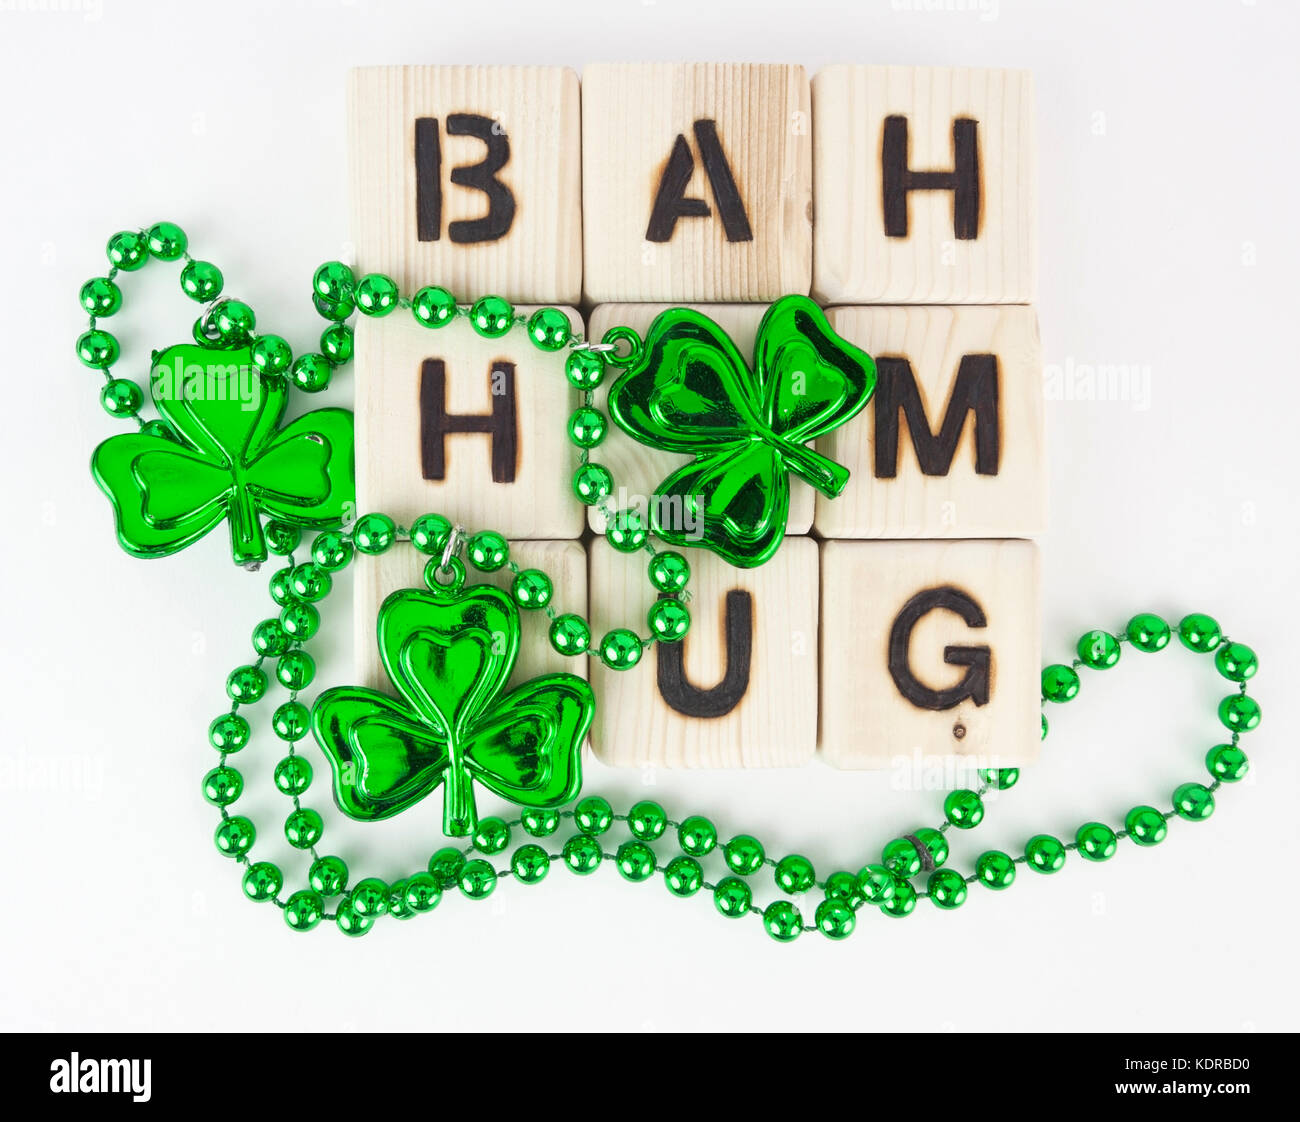 BAH HUMBUG concept applied to St. Patrick's Day. Isolated. Stock Photo